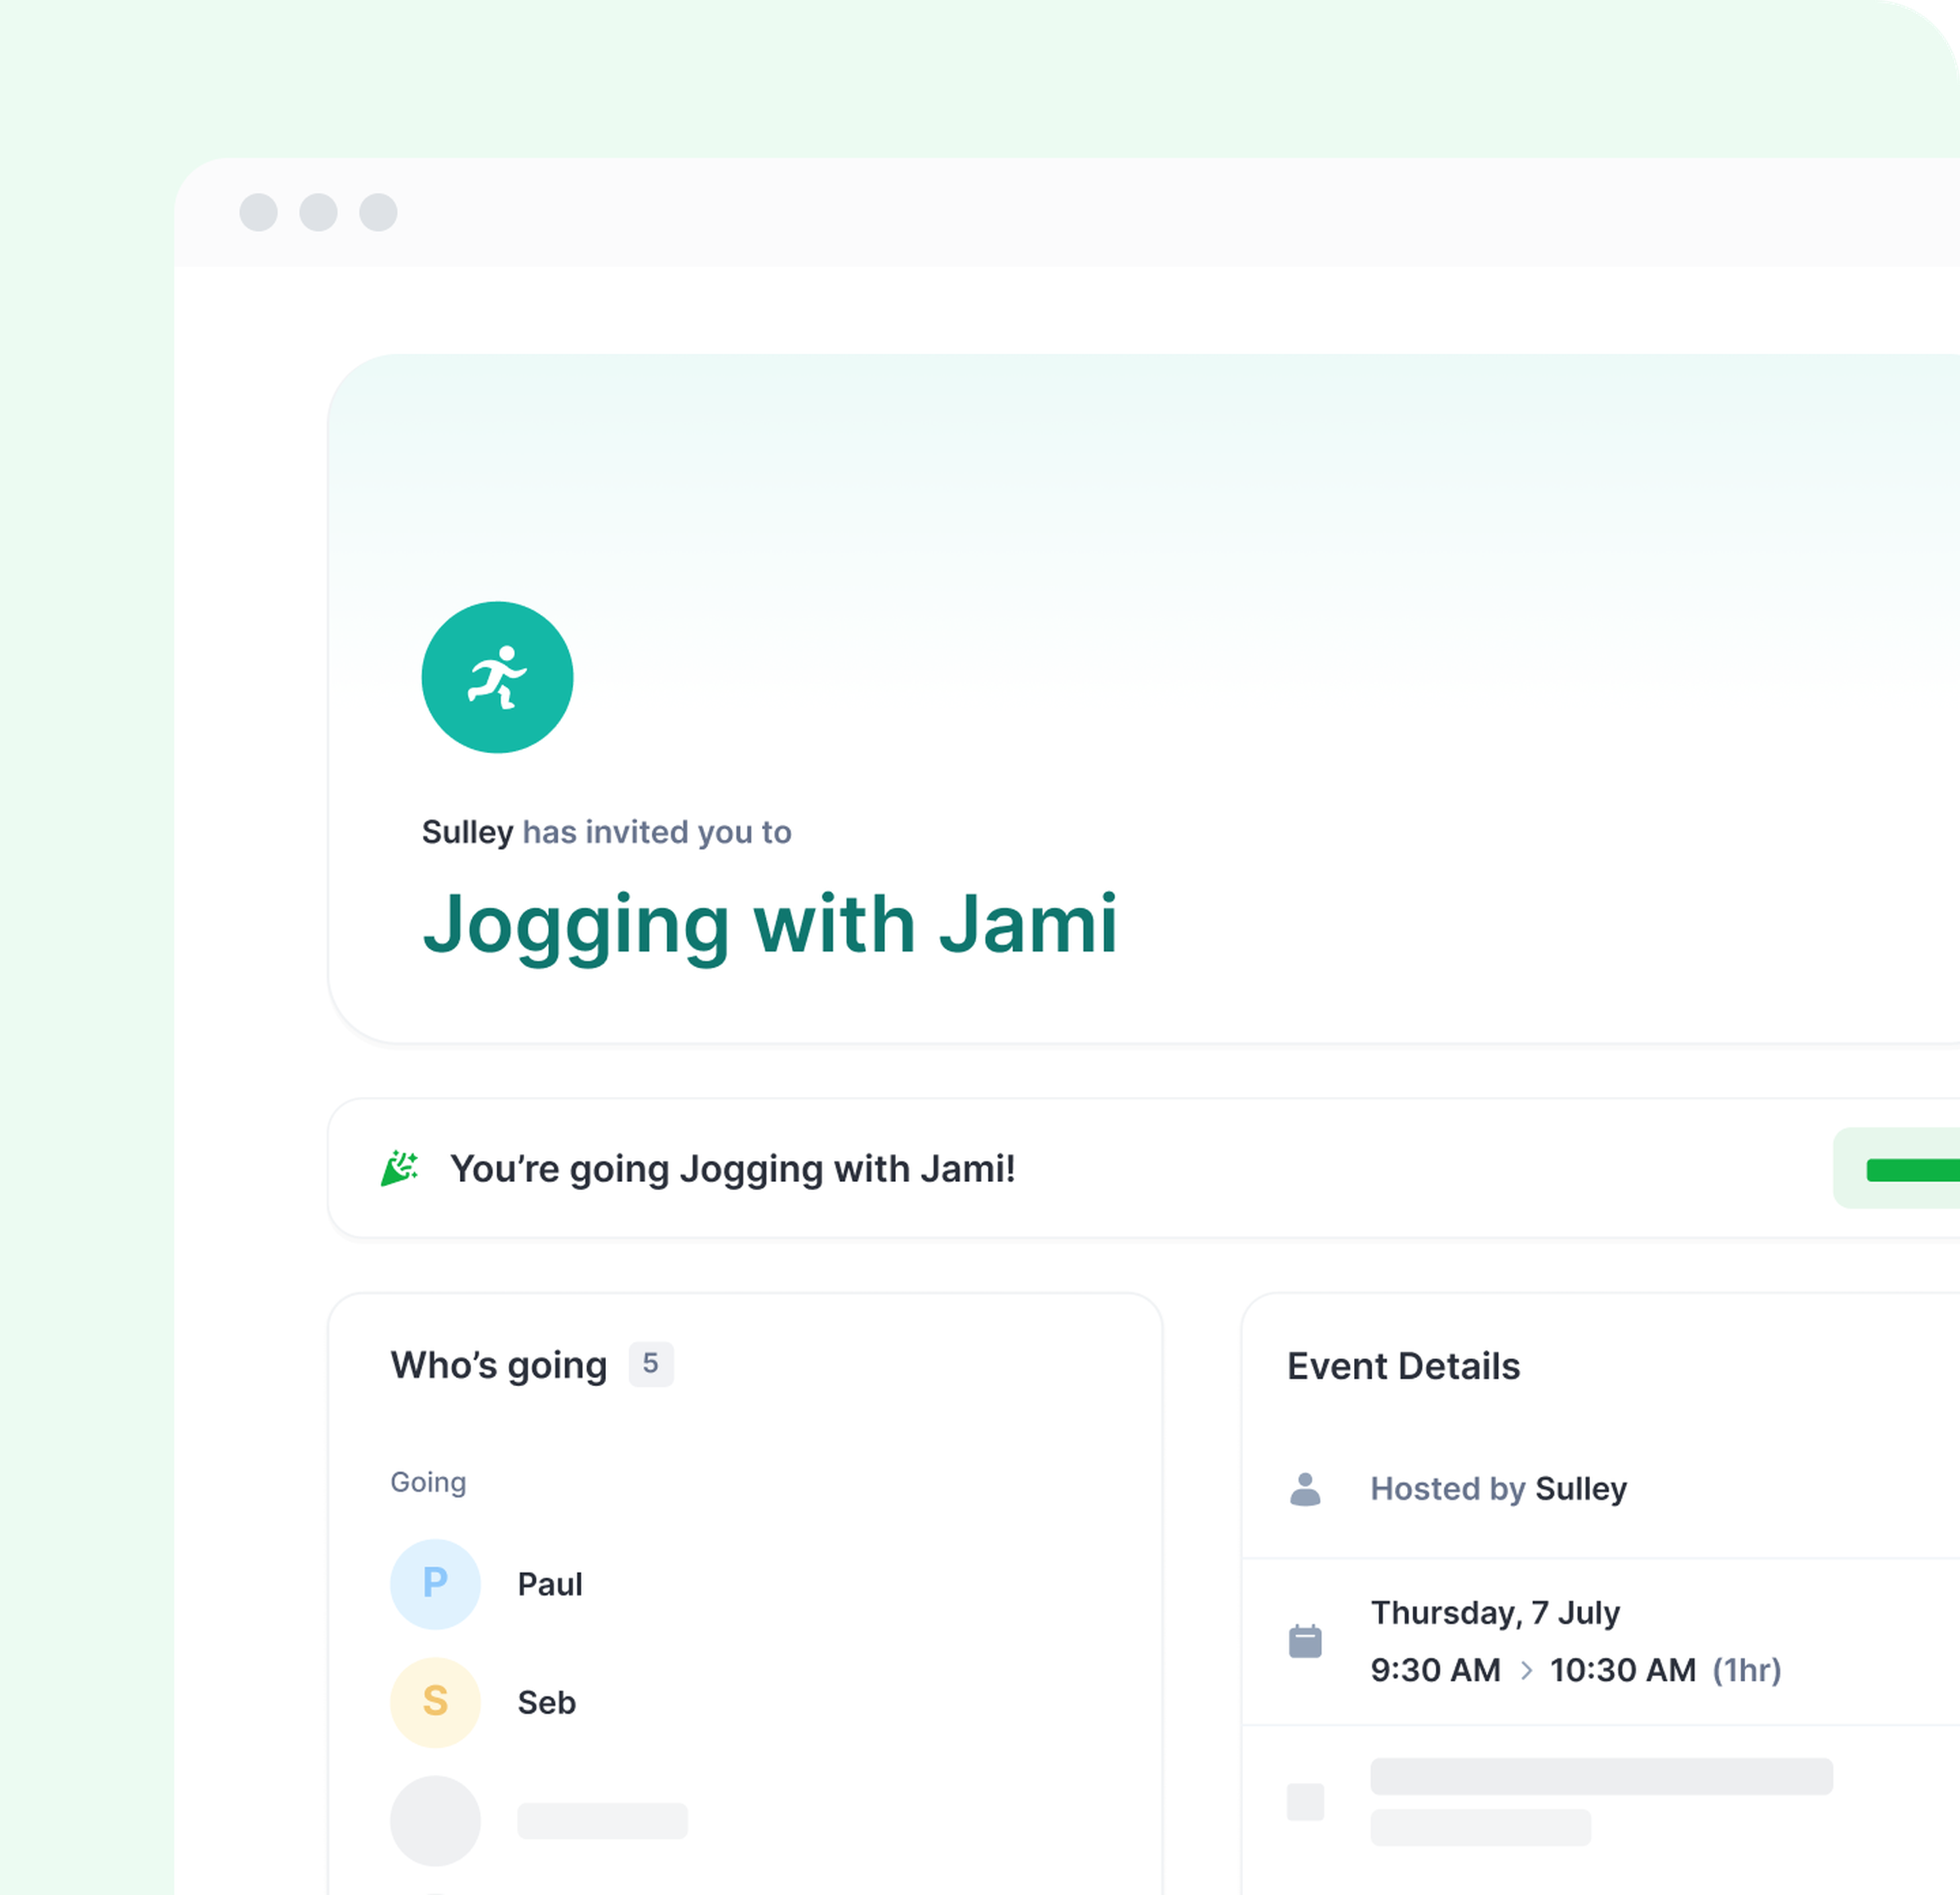 An event invitation for “Jogging with Jami” in Daybridge.